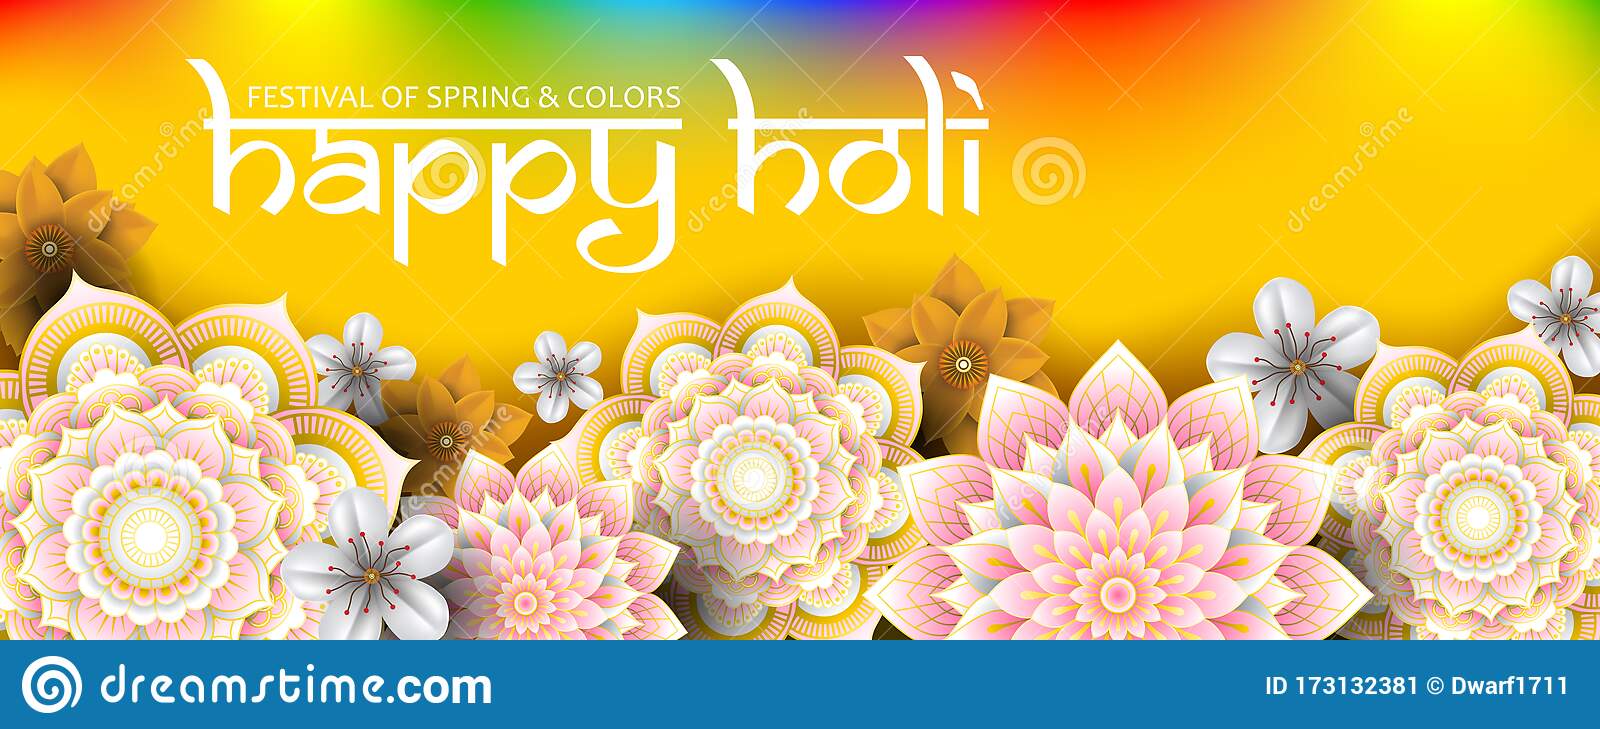 Happy Holi festival of spring and colors vector banner template with flowers and mandalas on rainbow background